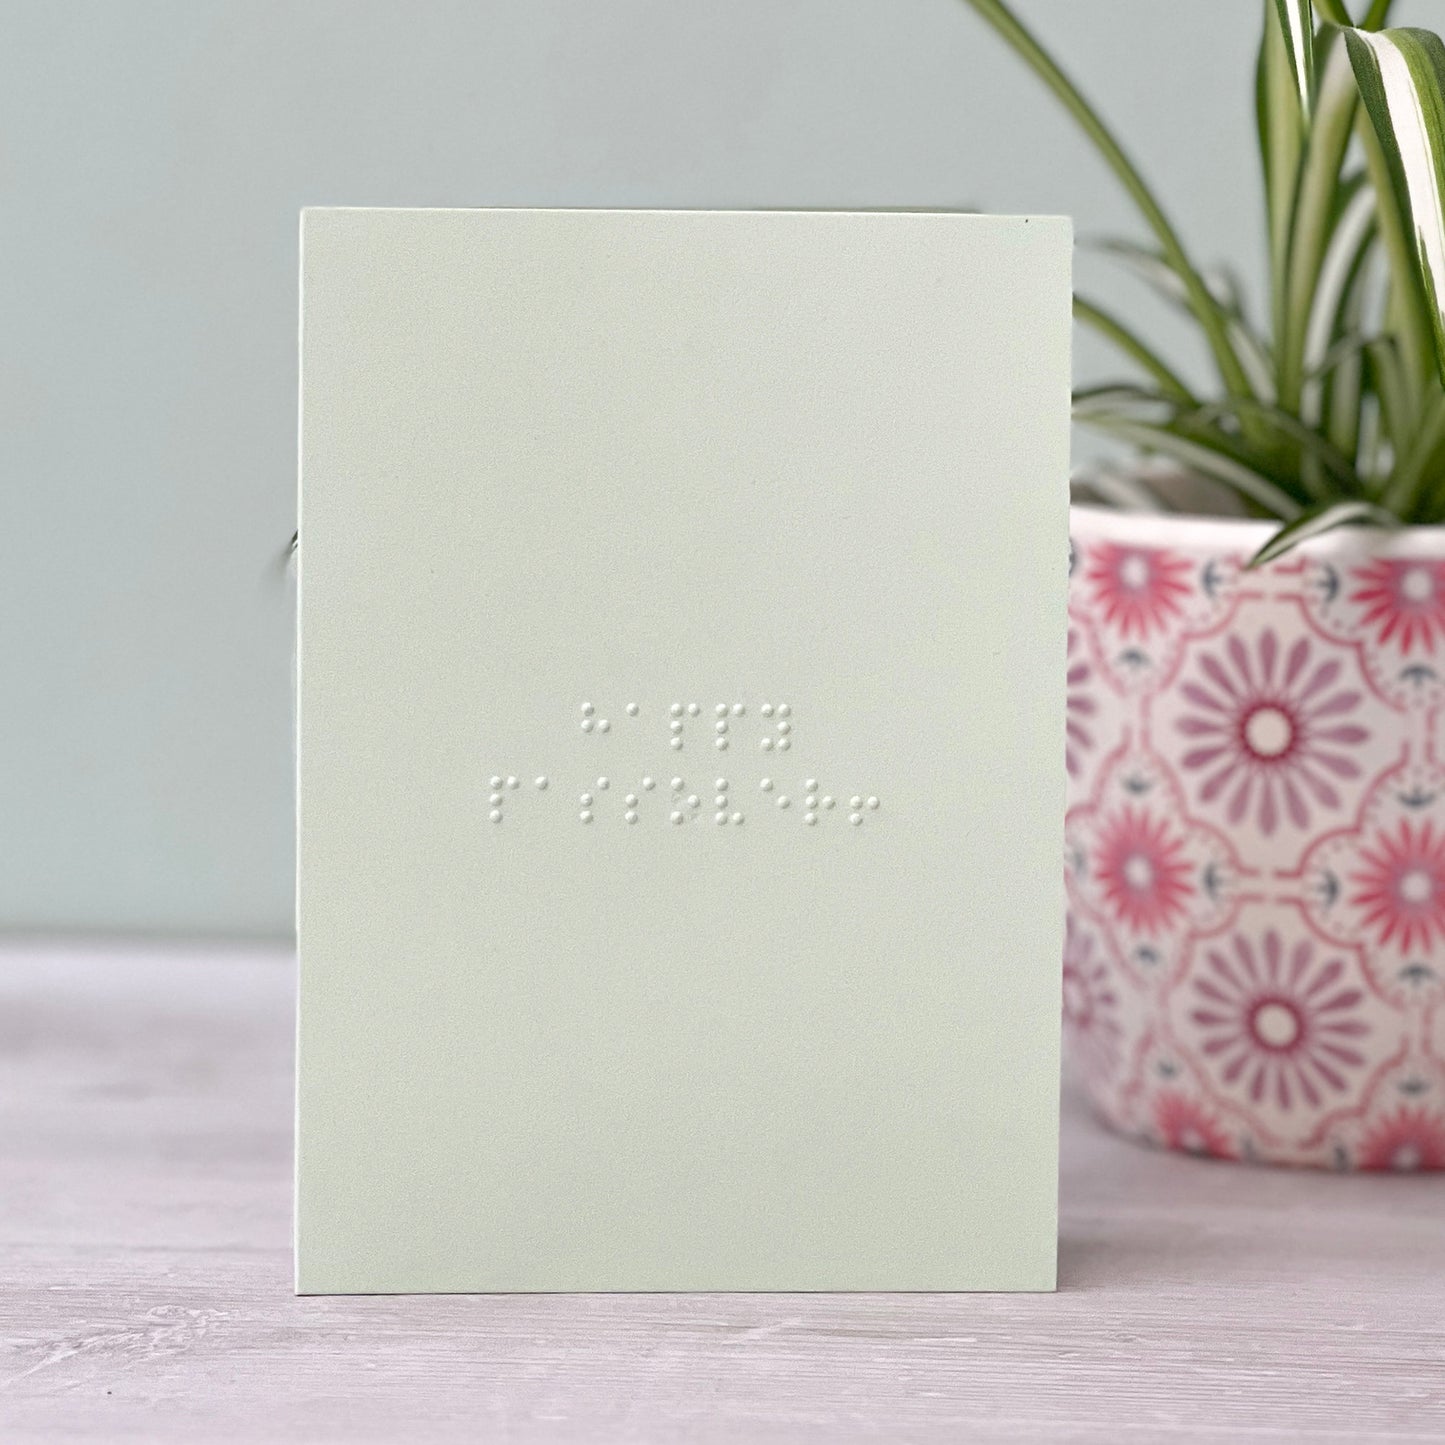 A pastel green greetings card with happy passover! written in grade 1 braille. There is a plant to the right of the photo.